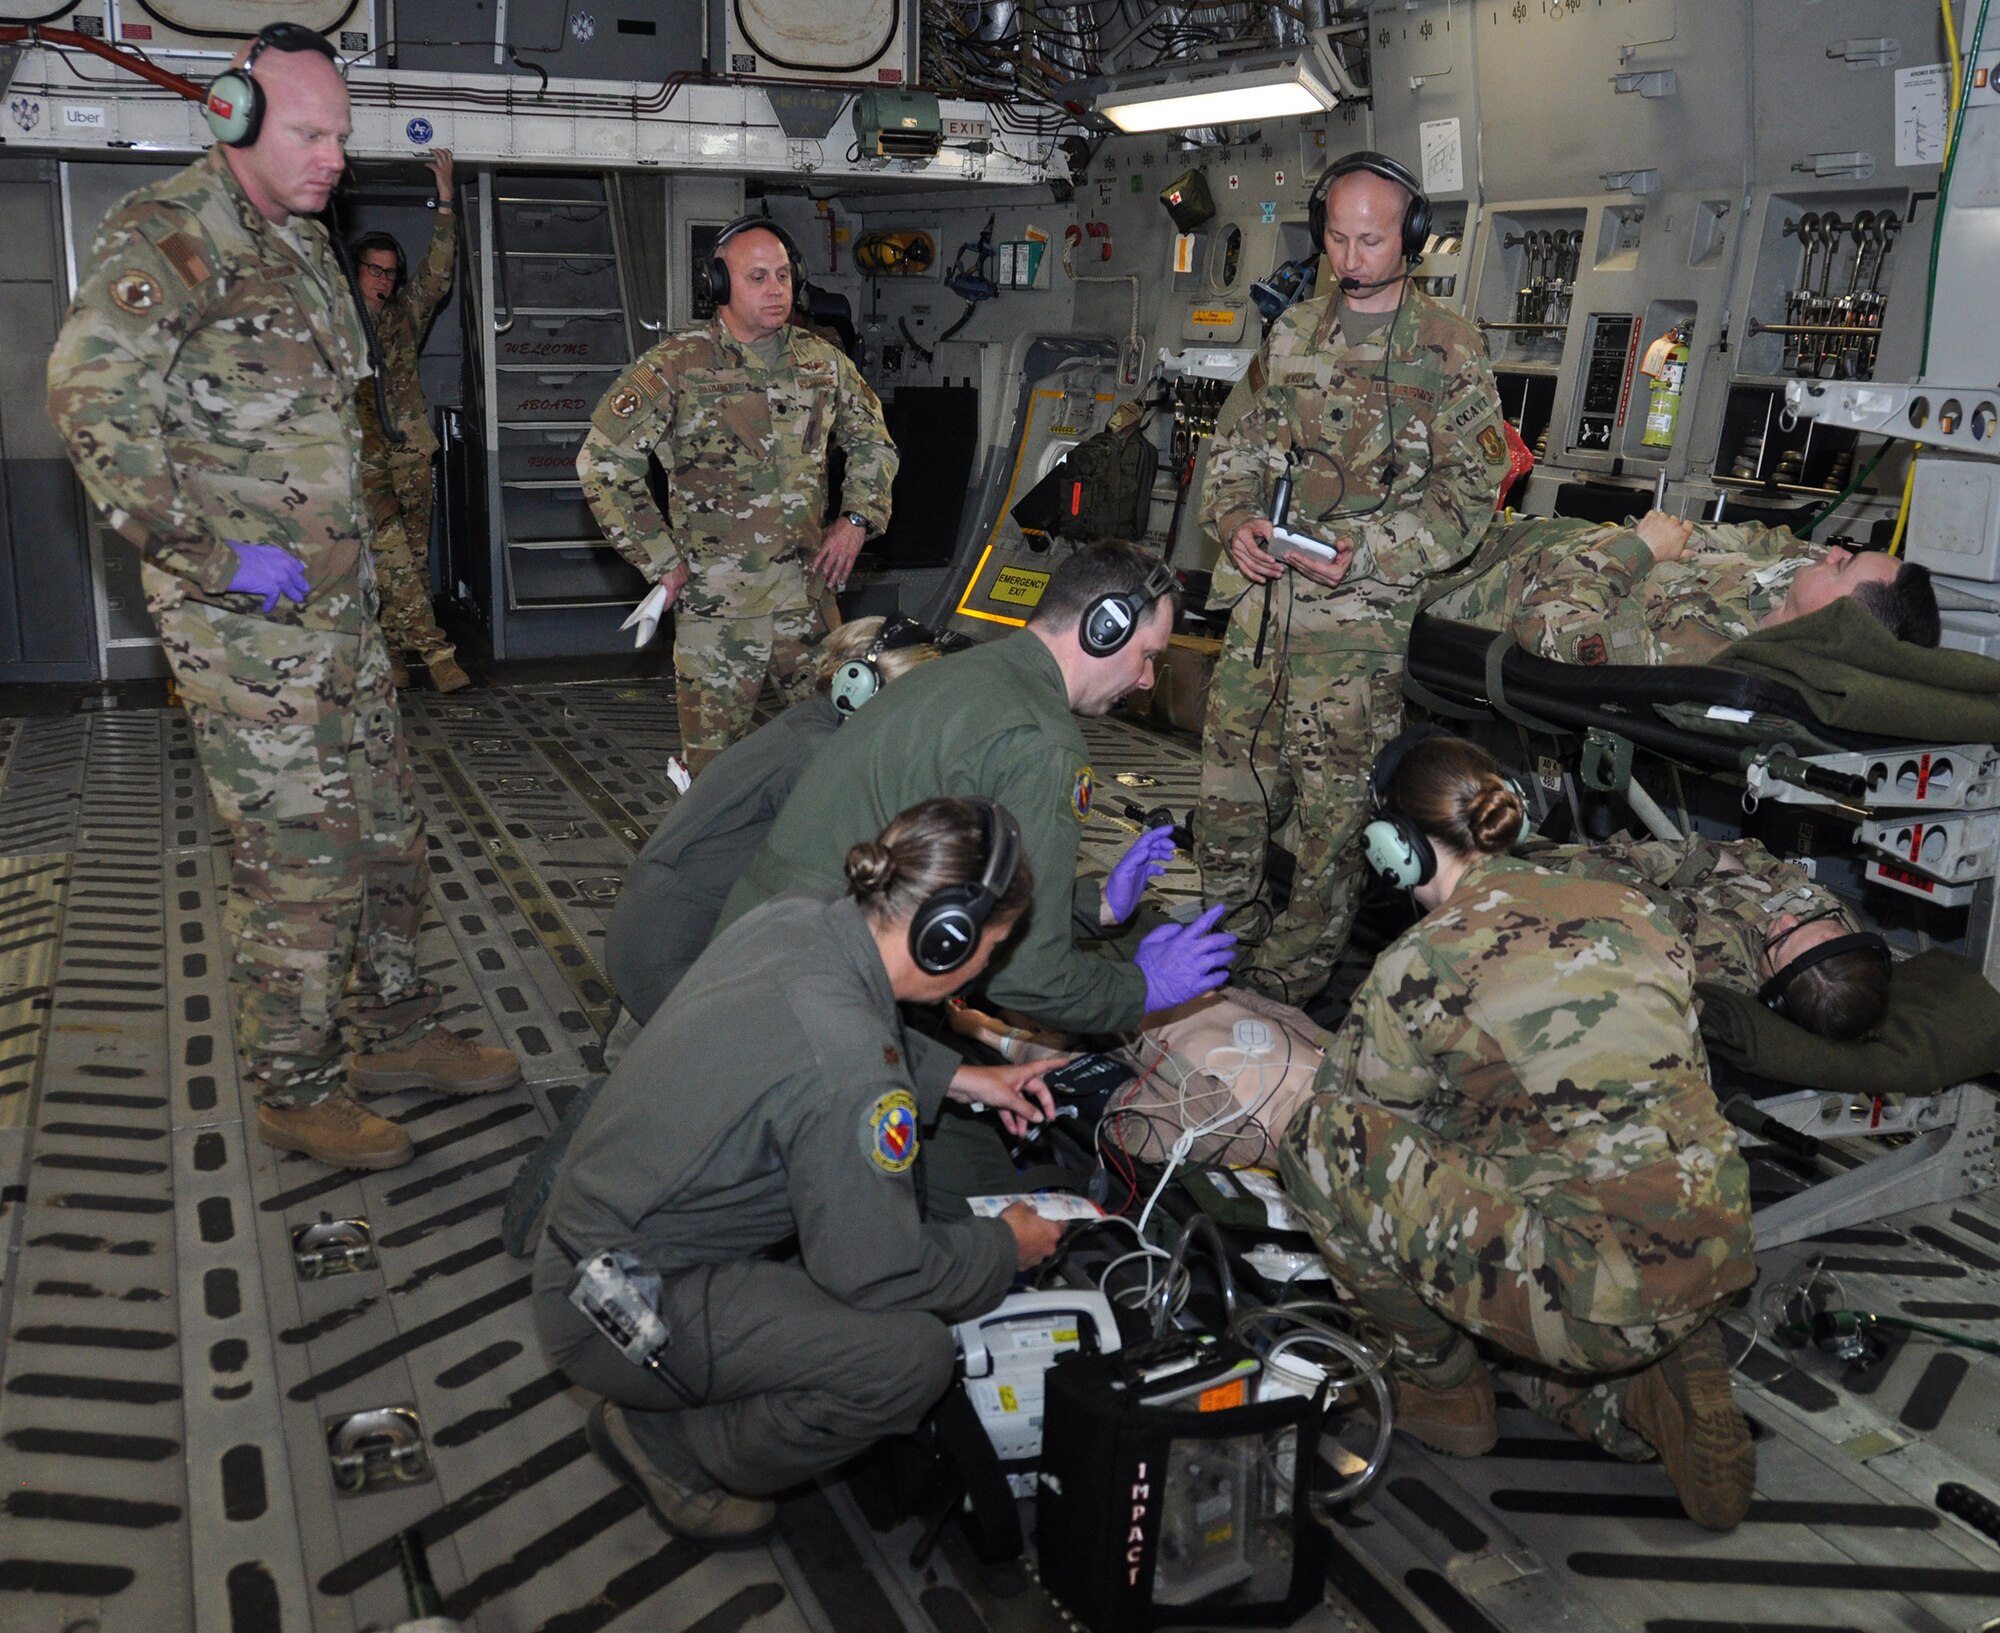 Lt. Col. Derek Sorensen, (standing far right) U.S. Air Force School of Aerospace Medicine medical director for en route care training, evaluates a 445th Aeromedical Evacuation Squadron crew during an AE readiness flight, May 8, 2019.